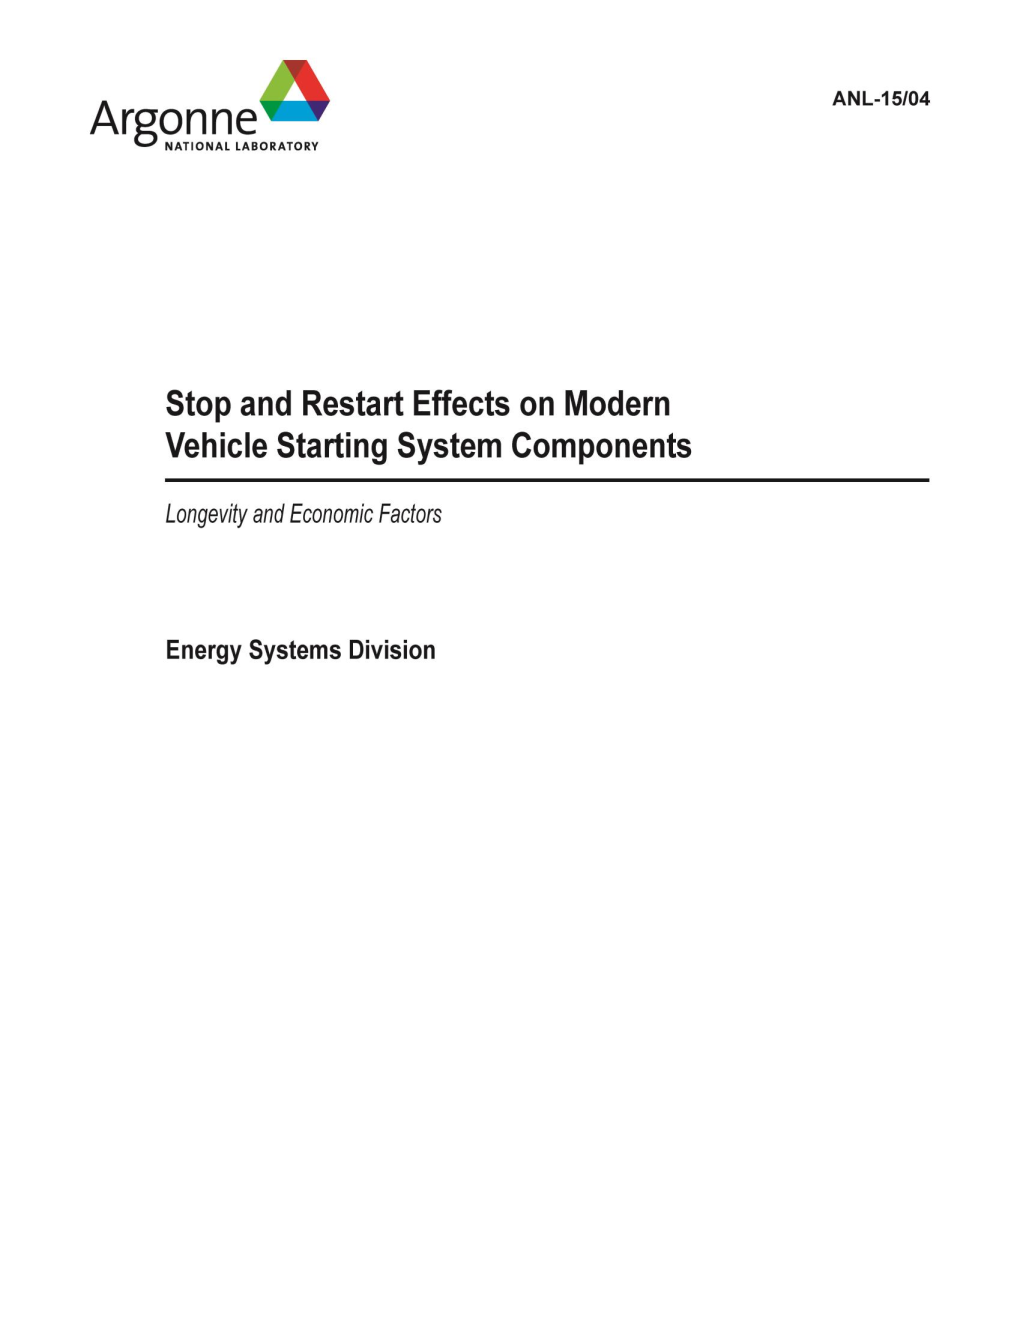 Stop and Restart Effects on Modern Vehicle Starting System Components Contents 1